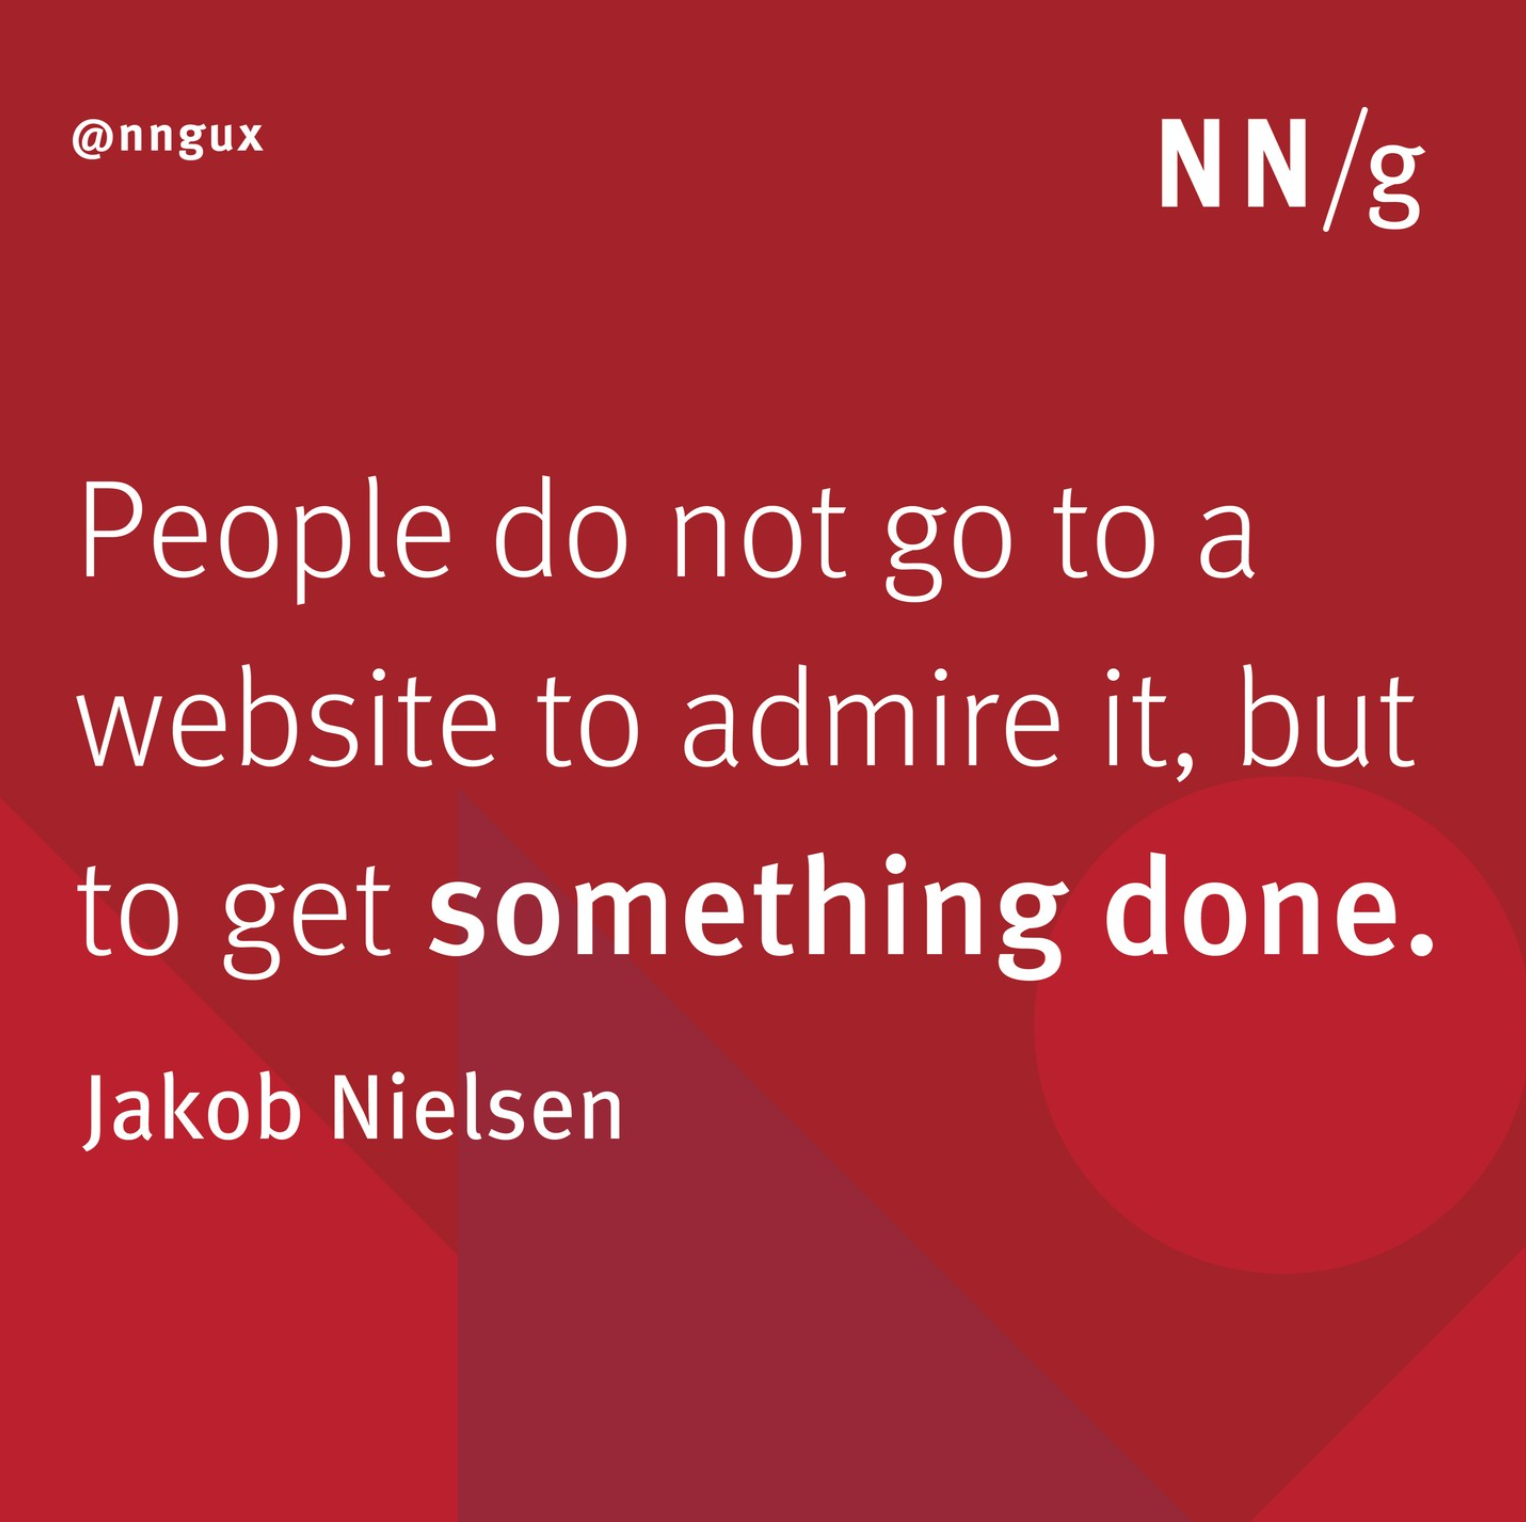 People do not go to a website to admire it, but to get something done. Jakob Nielsen